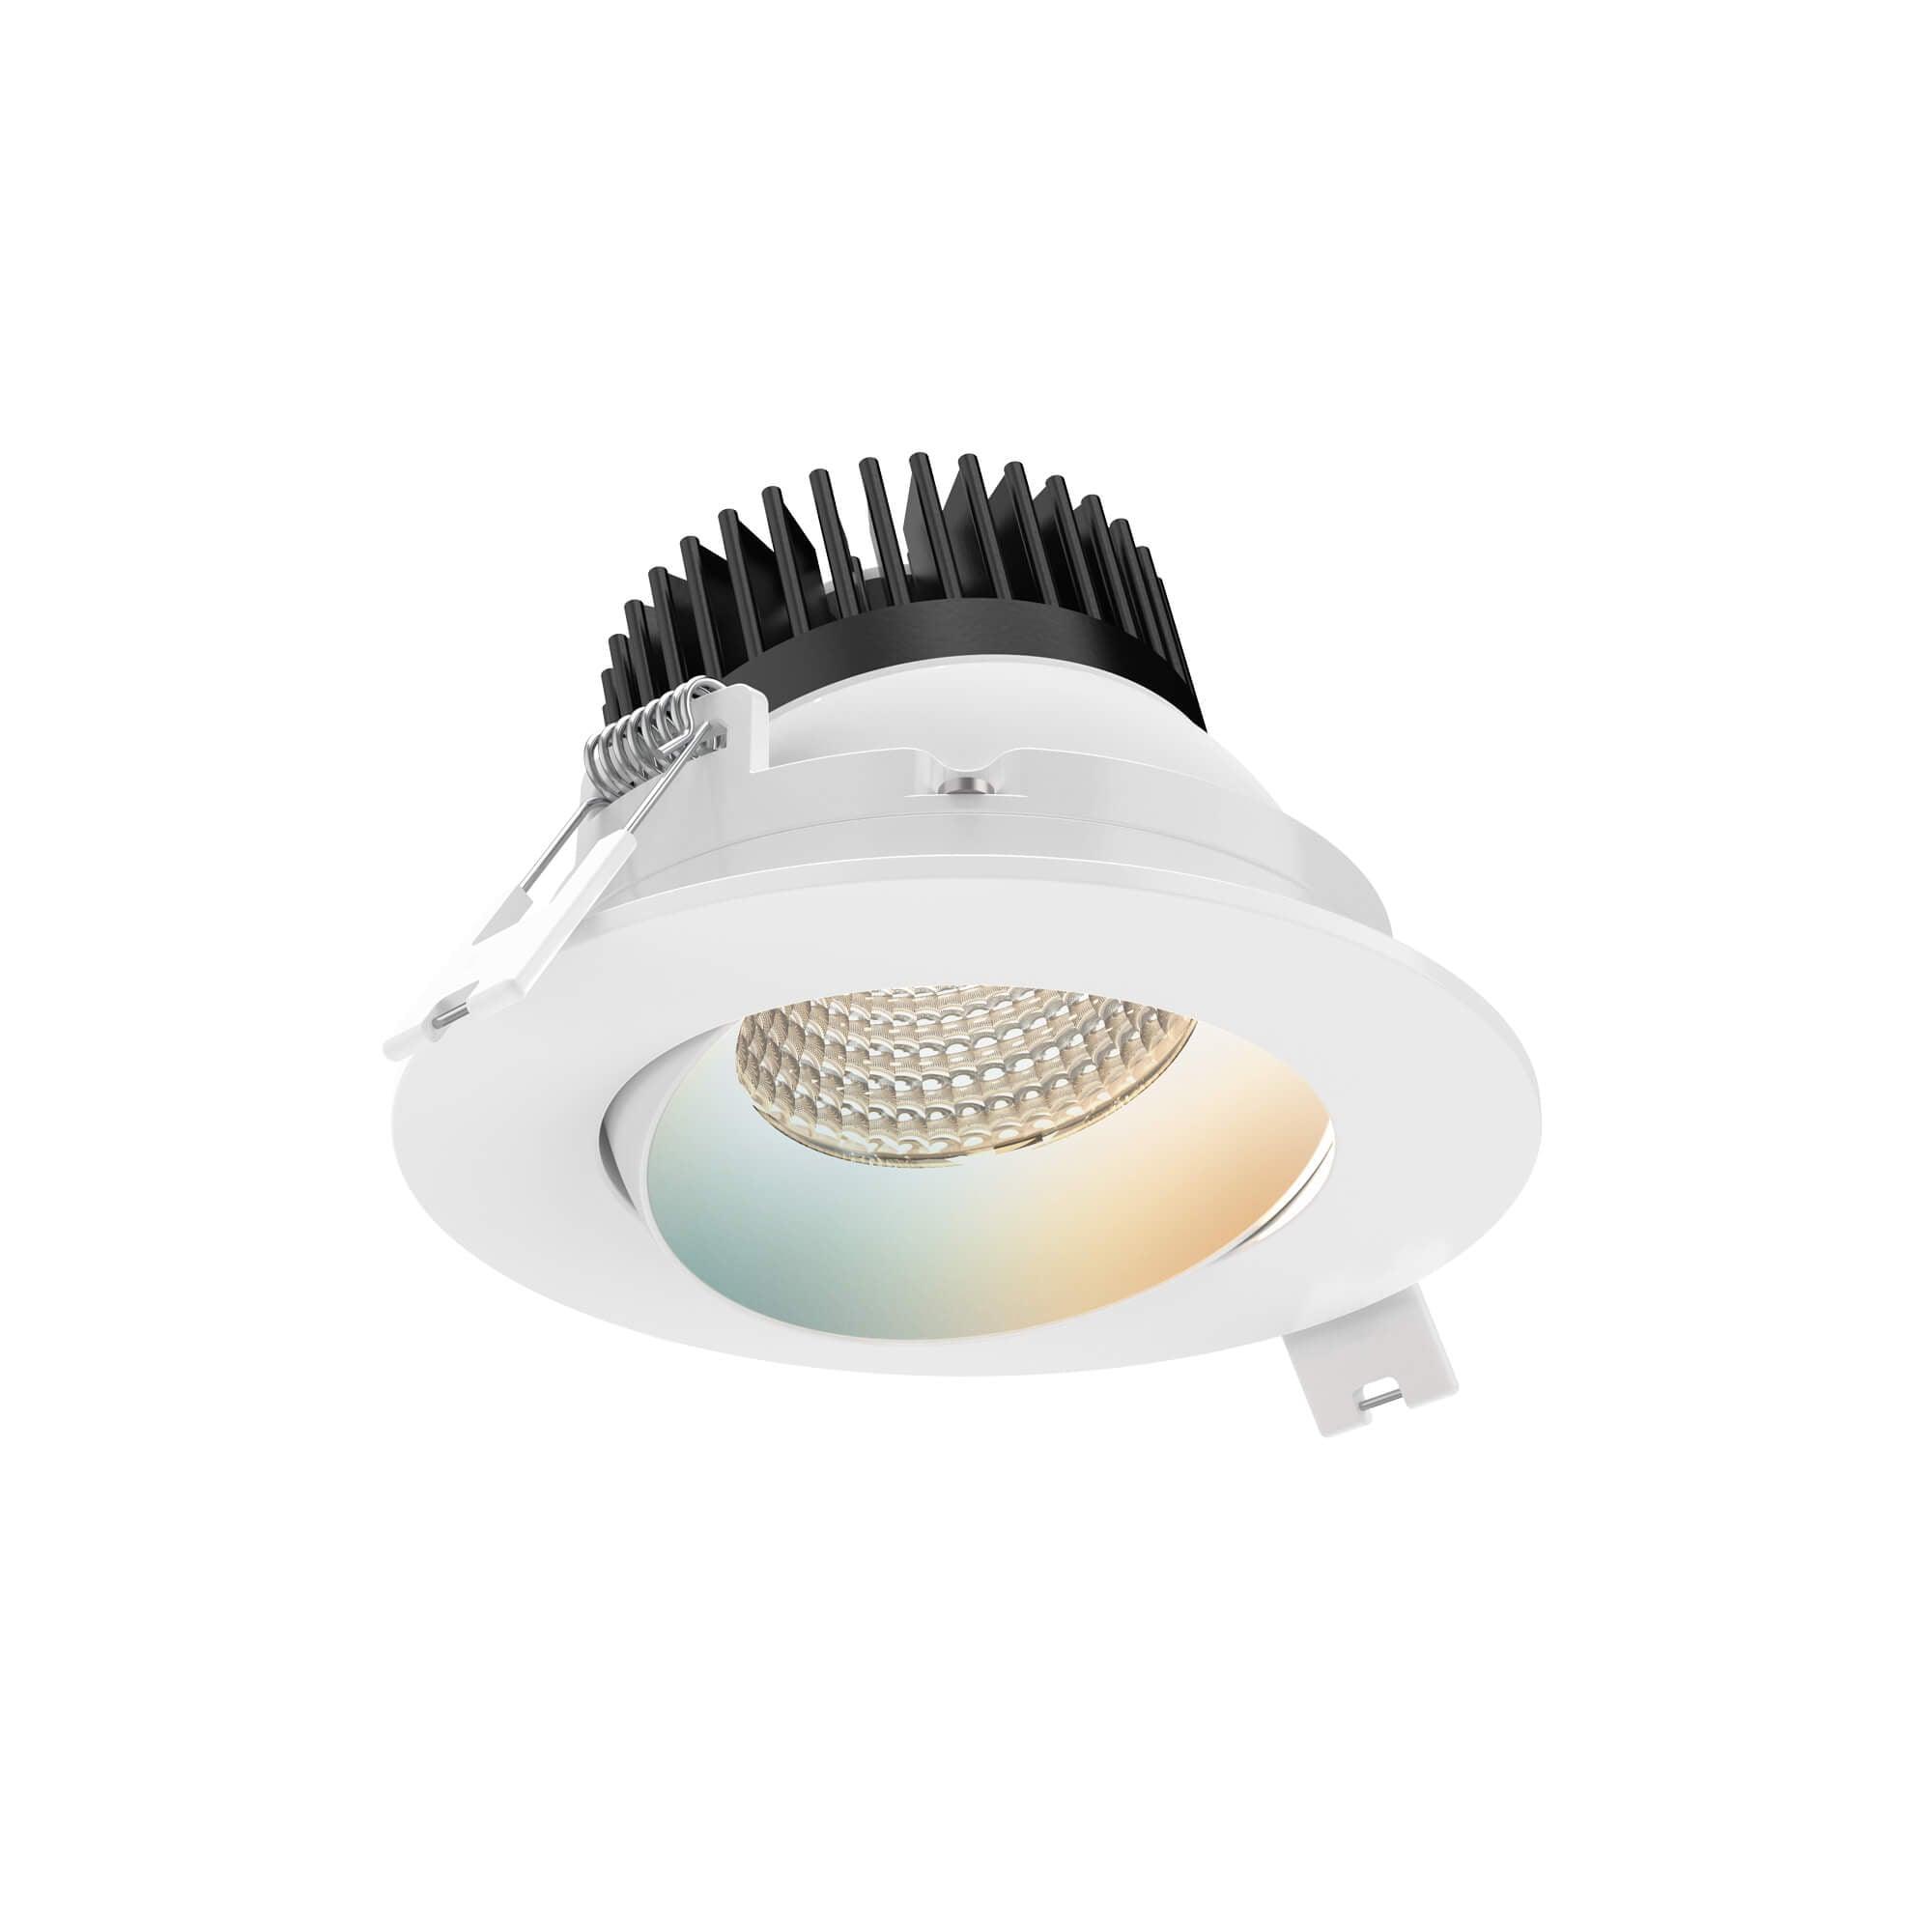 DALS Lighting - DCPro Smart 3.5'' Recessed Light - DCP-GBR35-WH | Montreal Lighting & Hardware